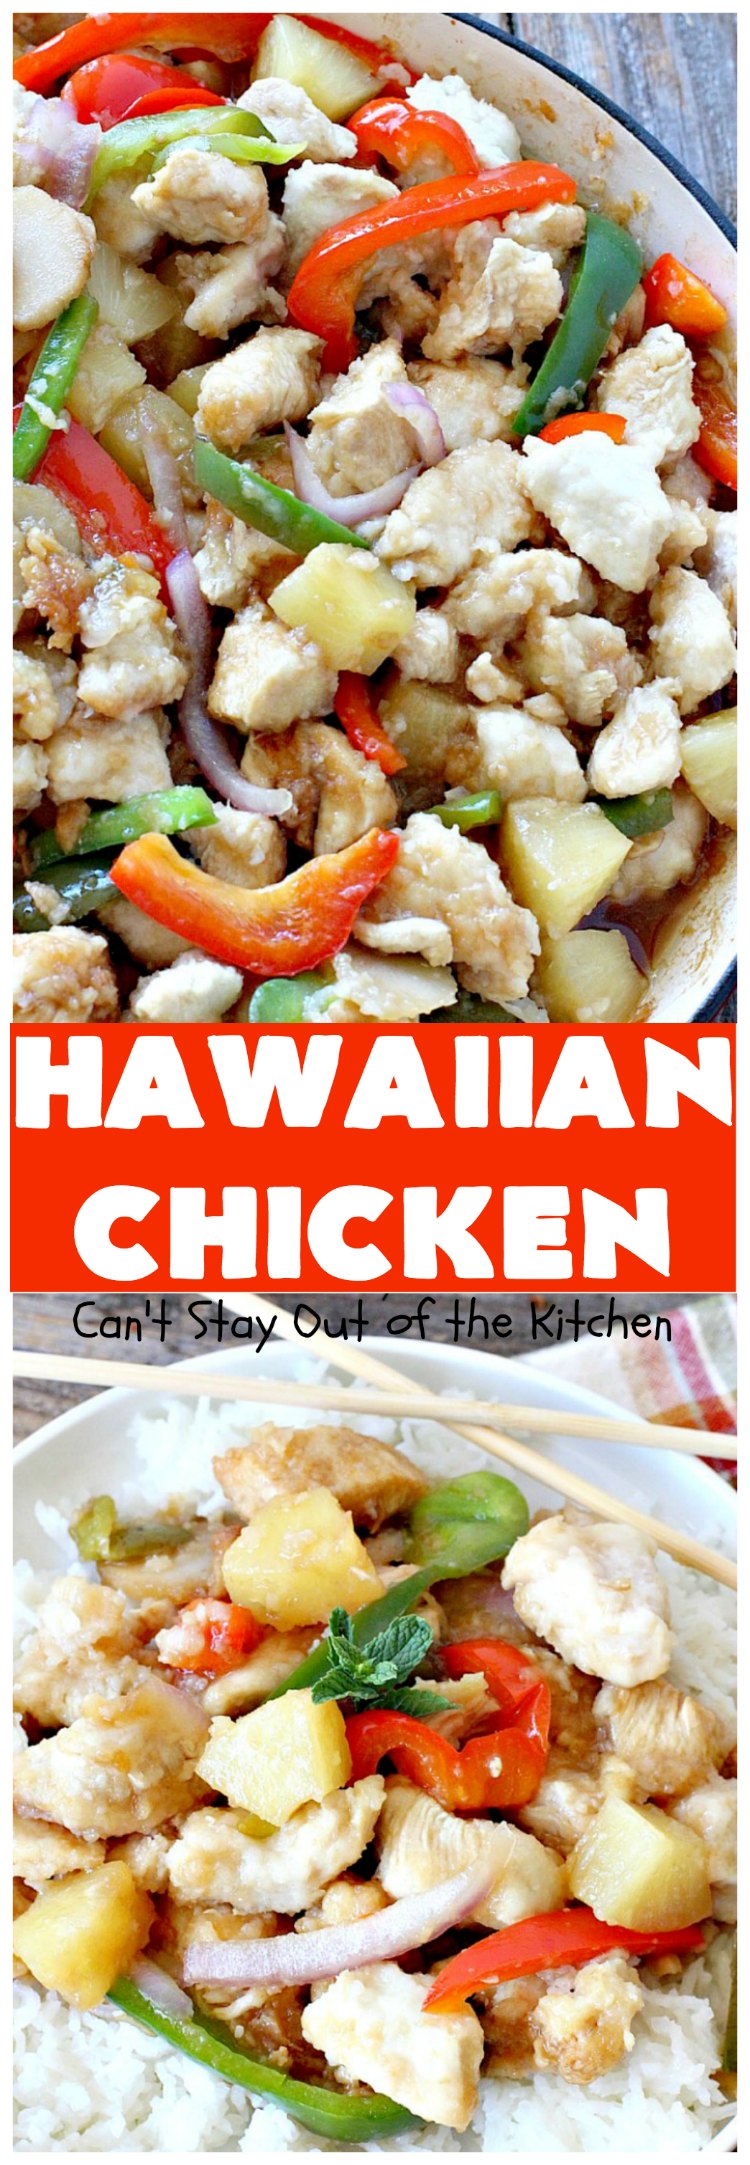 Hawaiian Chicken | Can't Stay Out of the Kitchen | this quick & easy #chicken dish has always been one of our favorites. It takes only about 30 minutes to prepare making it great for week night meals. #pineapple #Hawaiian #glutenfree 